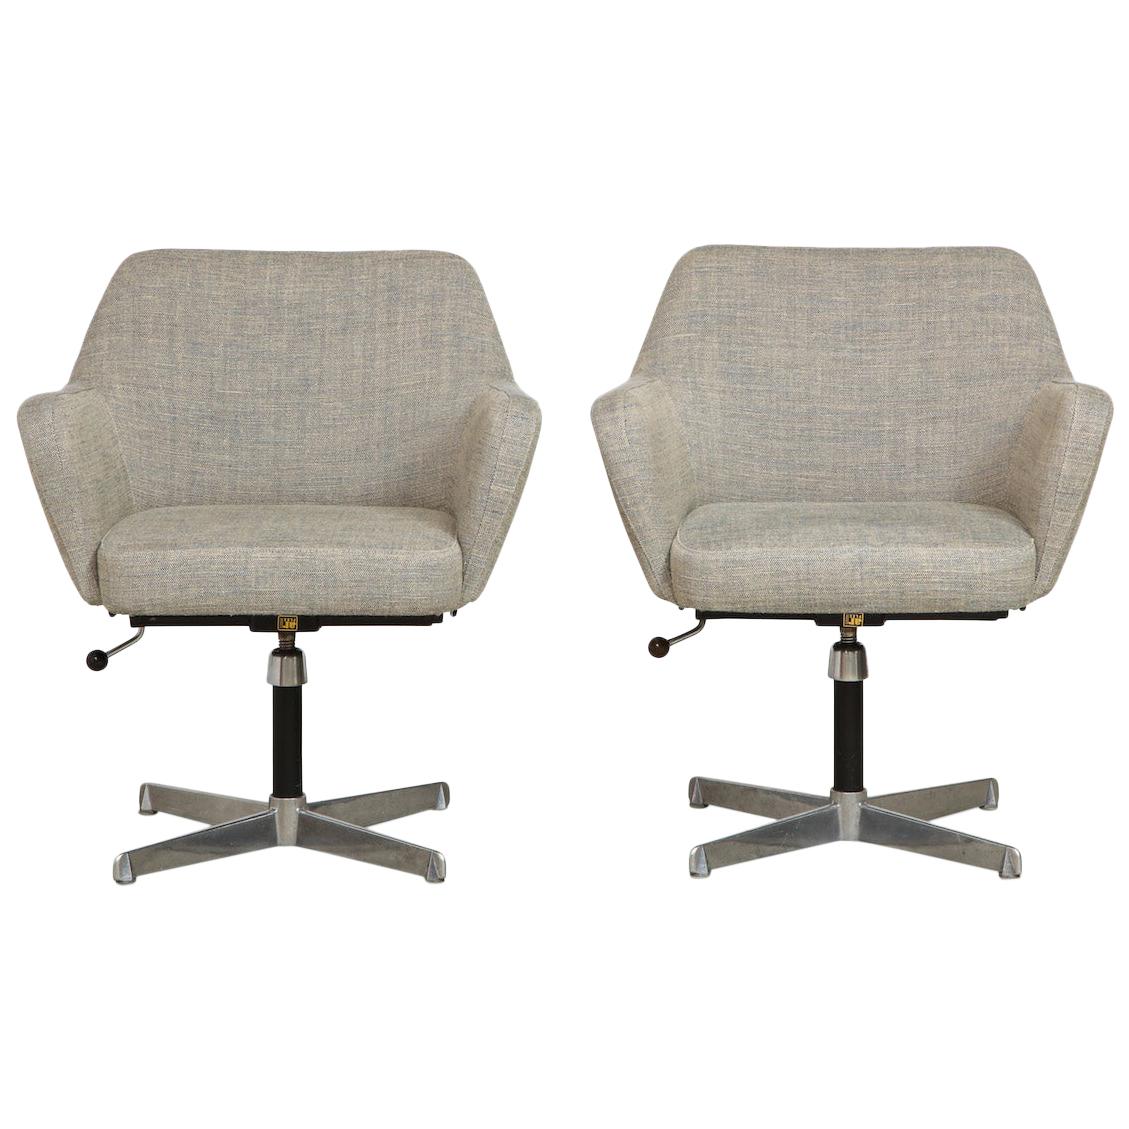 Gio Ponti & Alberto Roselli for Arflex, Pair of "Airone" Model Office Chairs For Sale